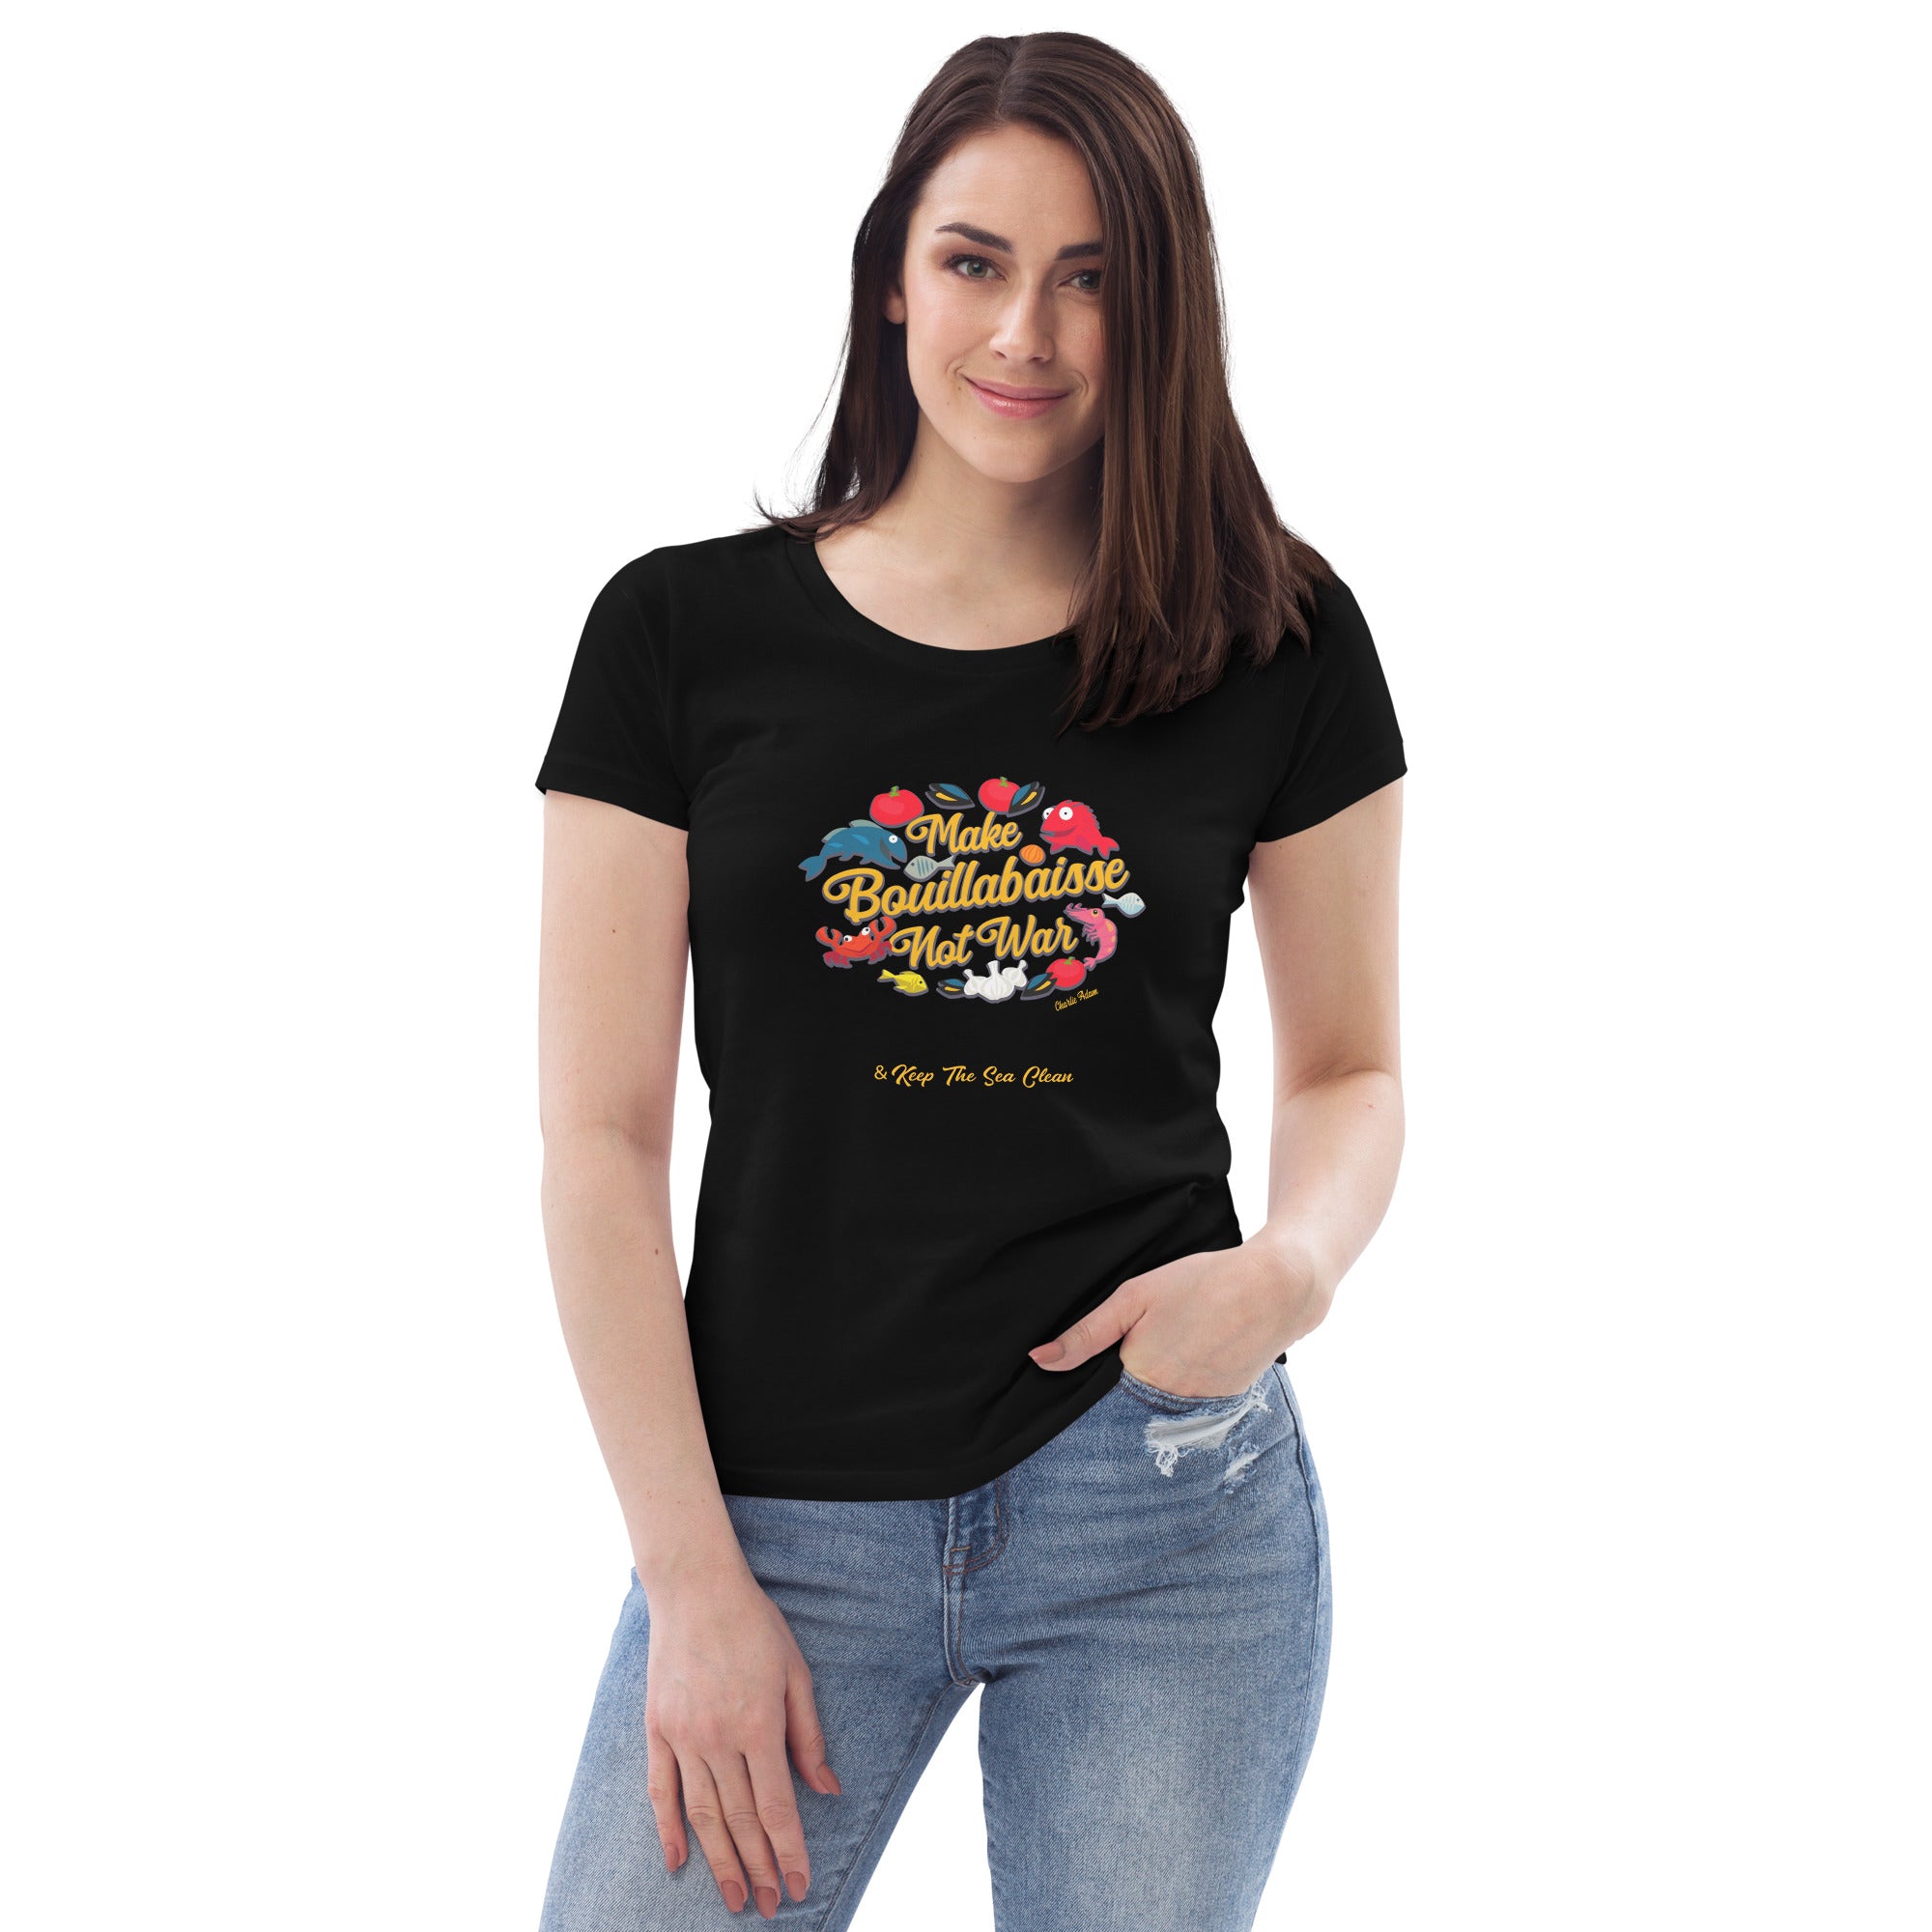 Women's fitted eco tee Make Bouillabaisse Not War & Keep the Sea Clean